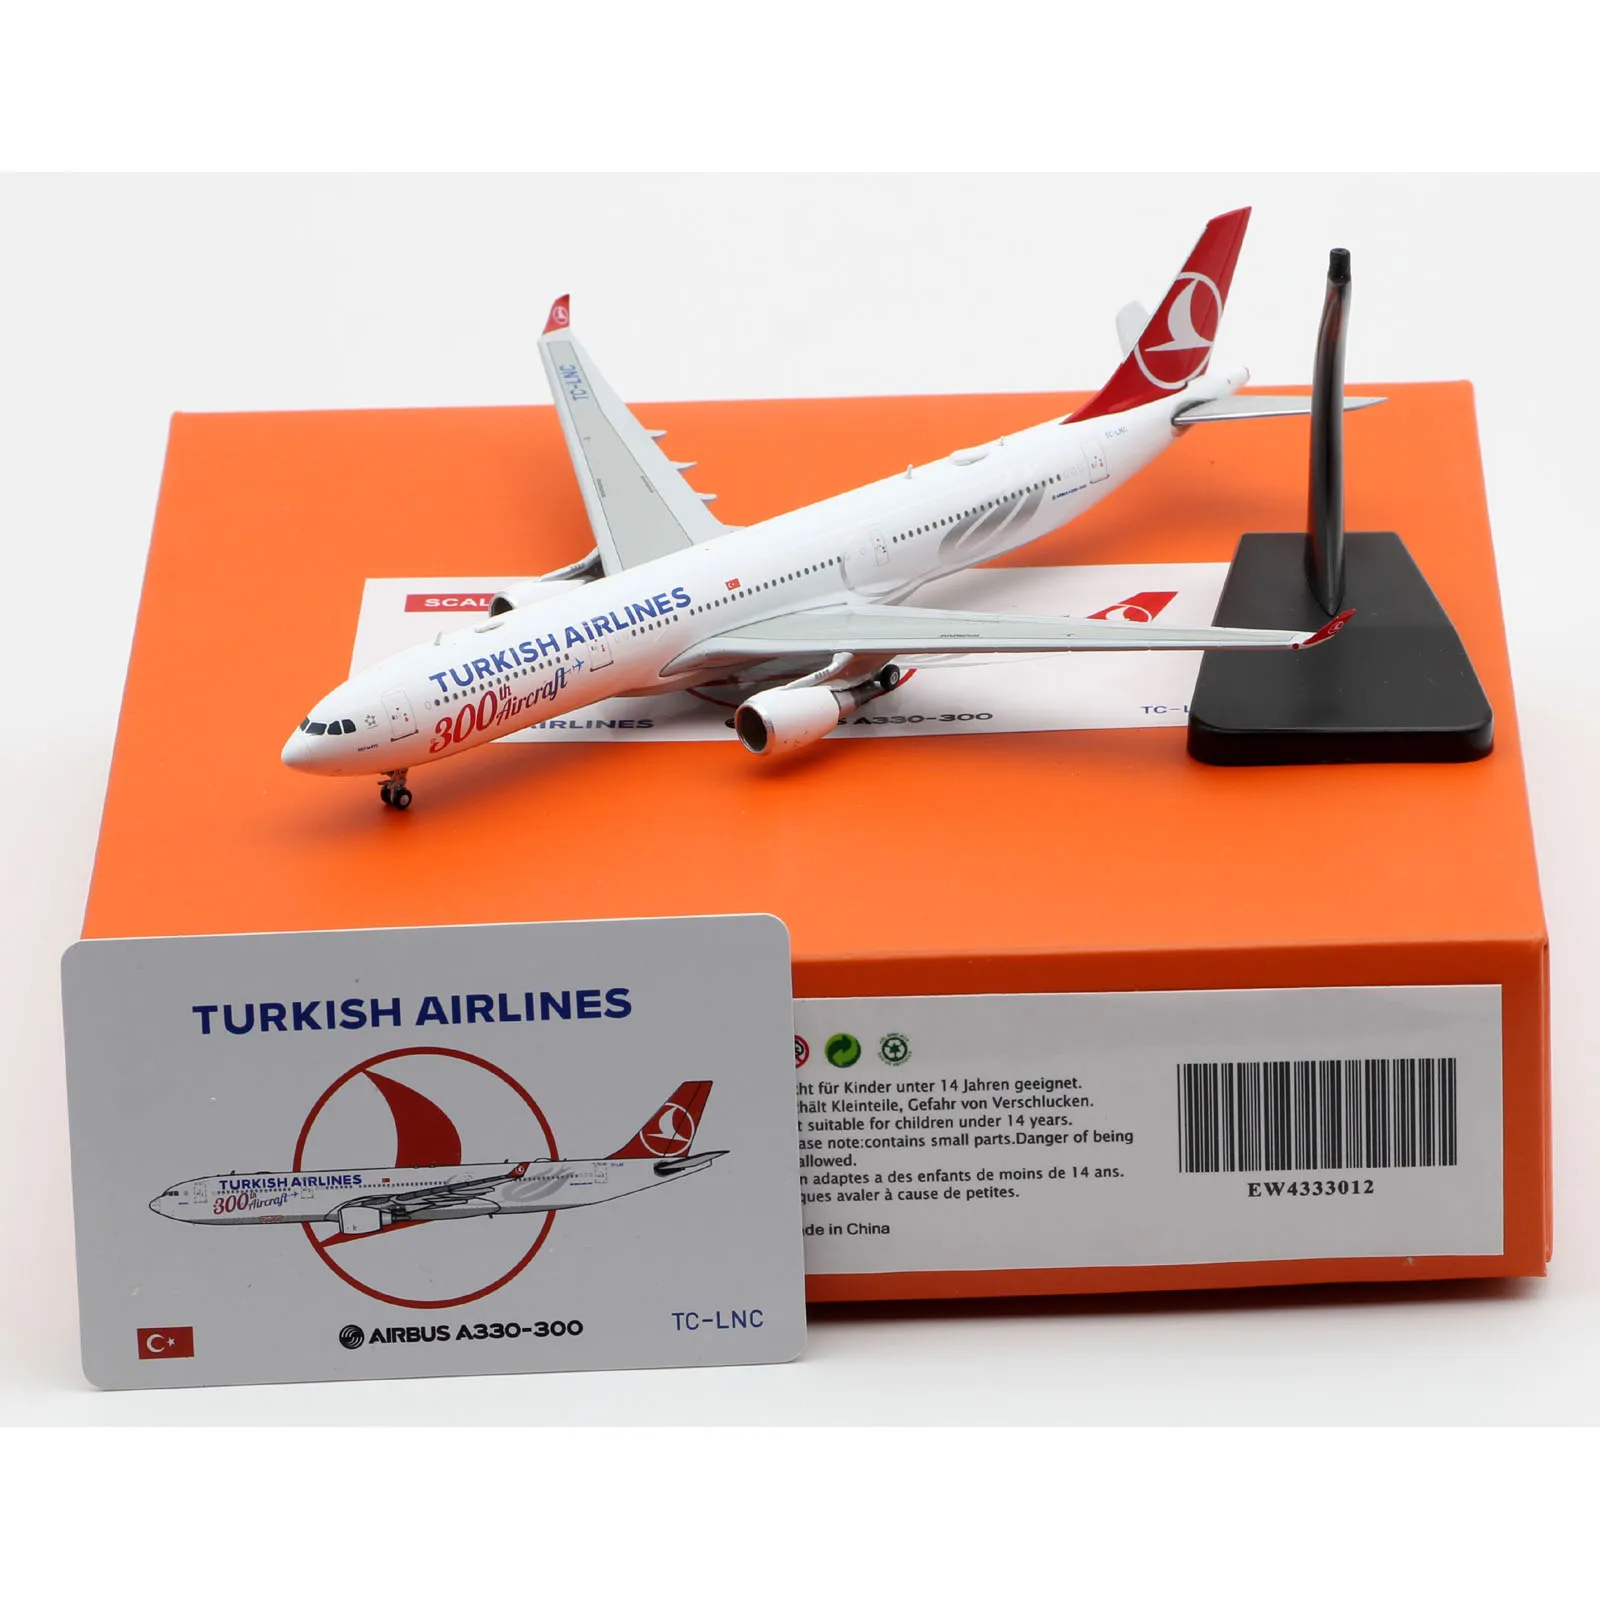 moo4333012-alliage-collection-avion-jc-ailes-1-400-turkish-airlines-staralliance-airbus-a330-300-diecast-avion-modele-tc-lnc